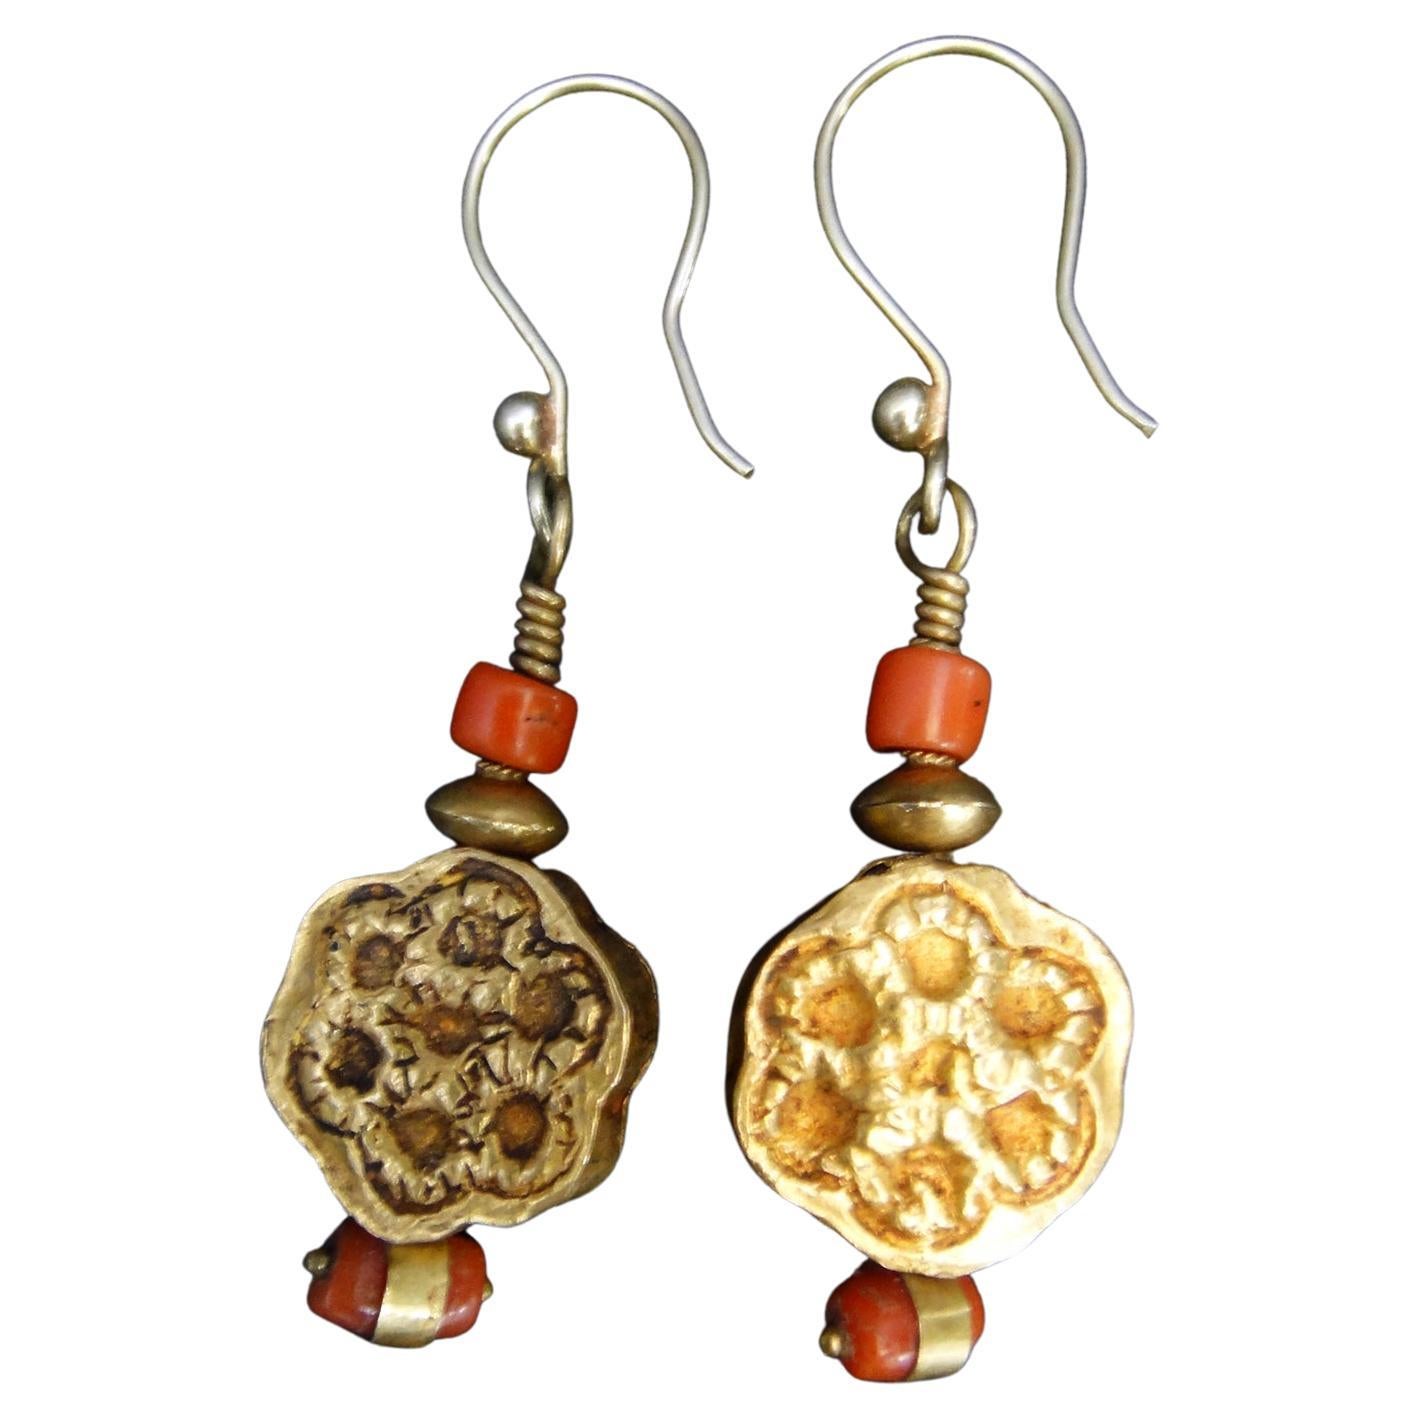 Antique 21k Gold Floral Earrings with Coral Accent Beads For Sale